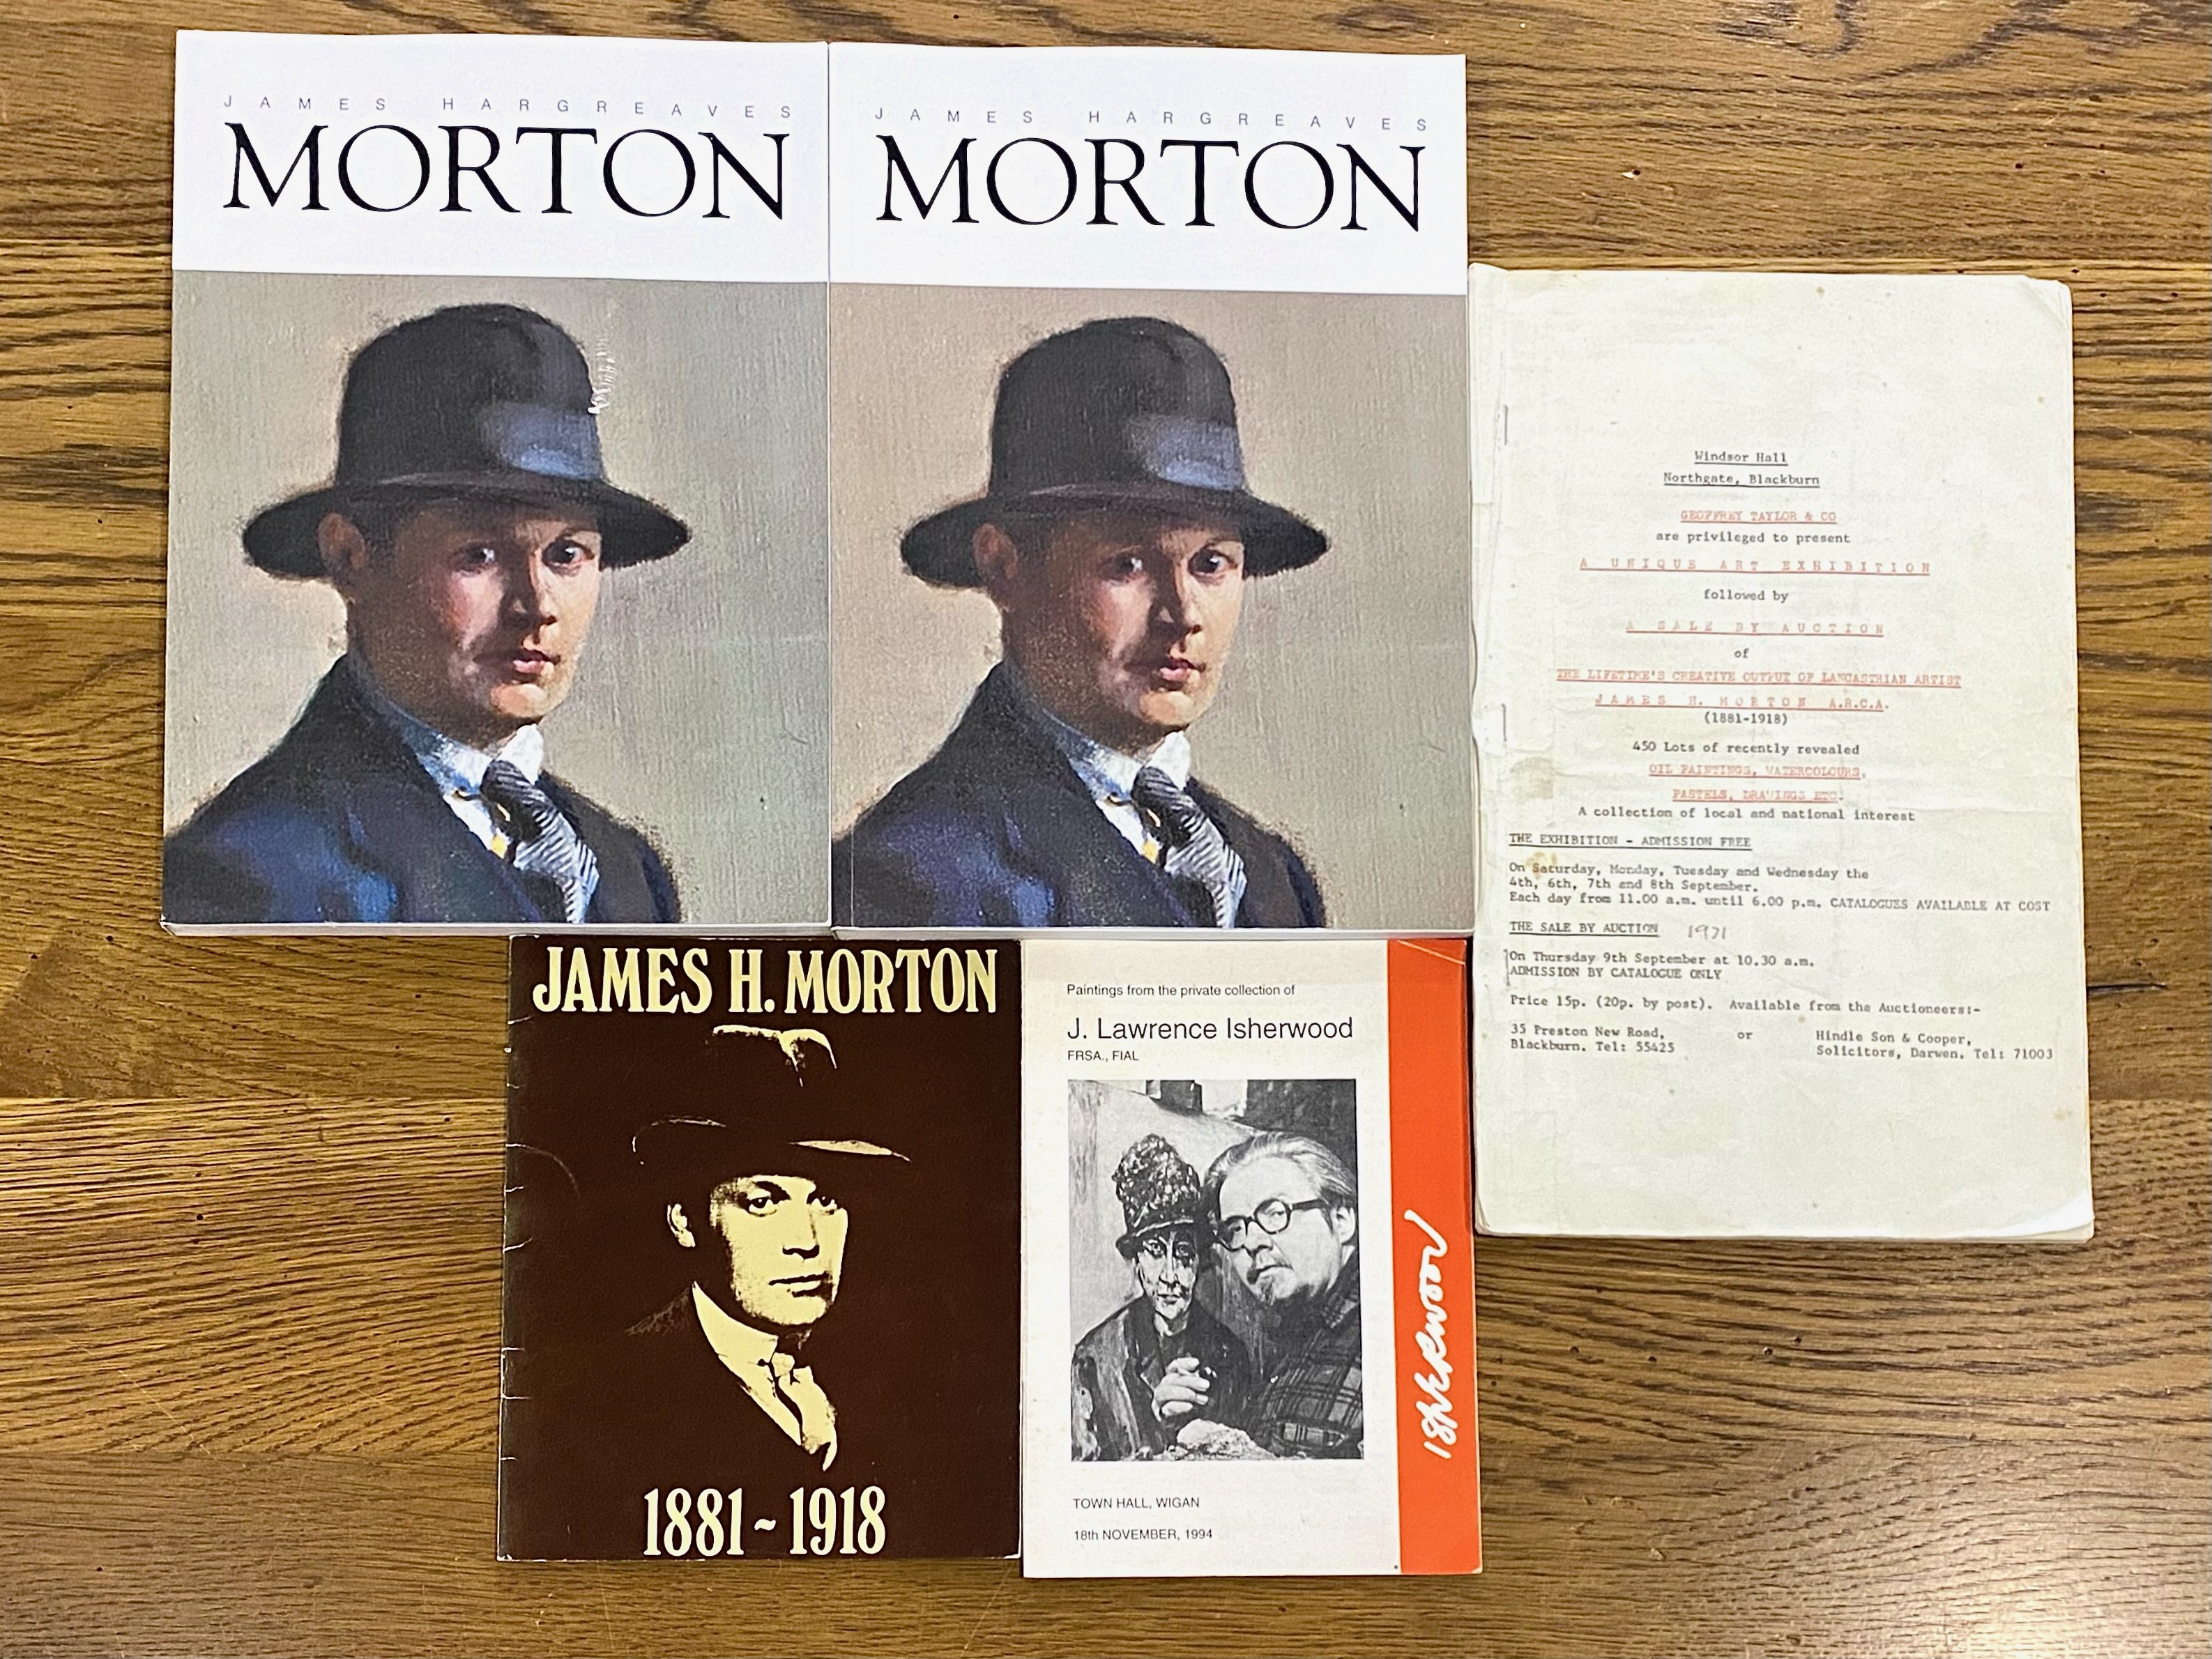 James Hargreaves Morton (1881-1918) A Collection of Rare Books, to include an original auction